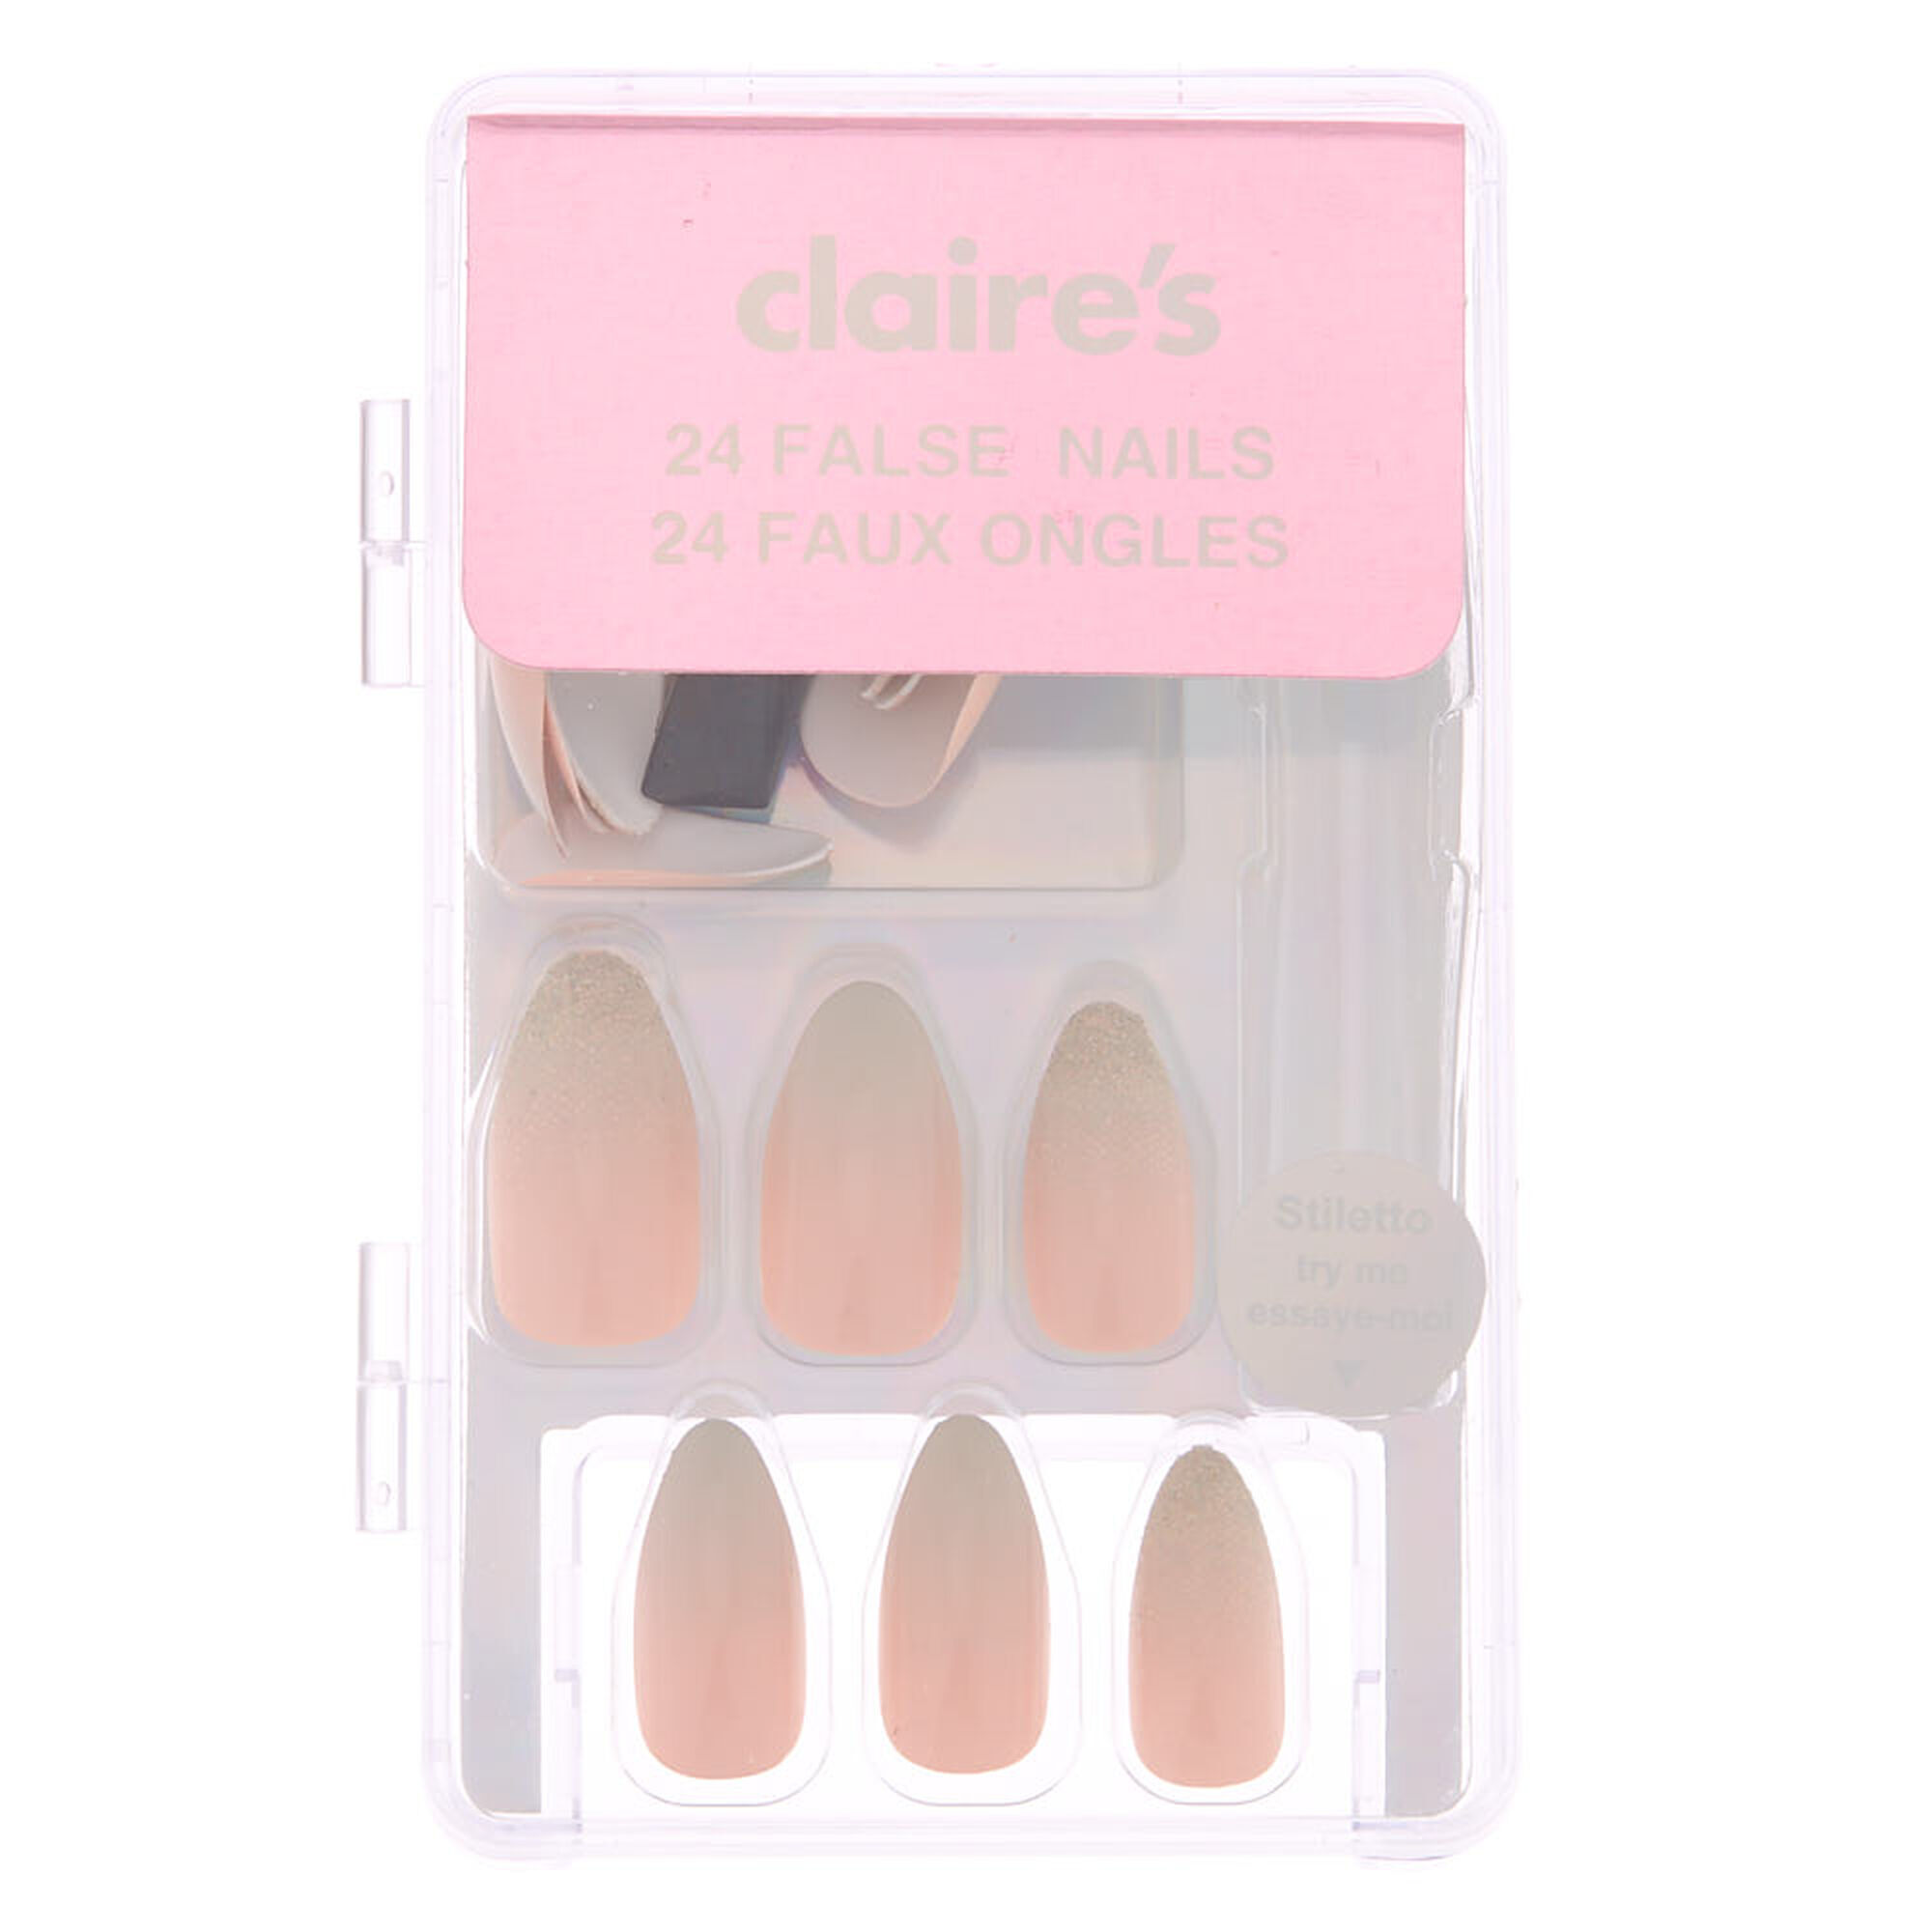 View Claires Ombre Glitter Stiletto Faux Nail Set Pink 24 Pack Grey information